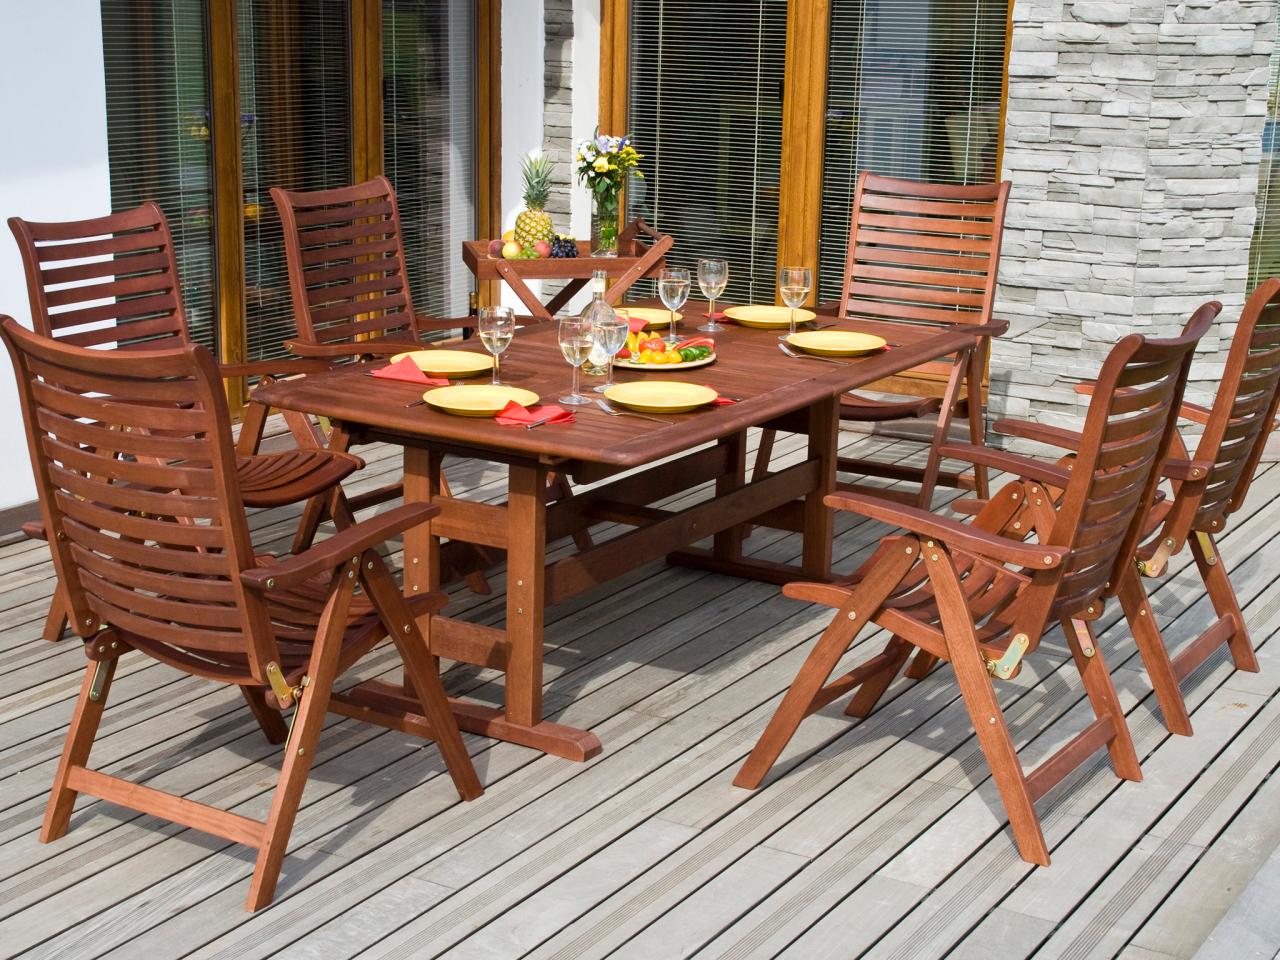 Images of Tips for Refinishing Wooden Outdoor Furniture wooden outdoor furniture